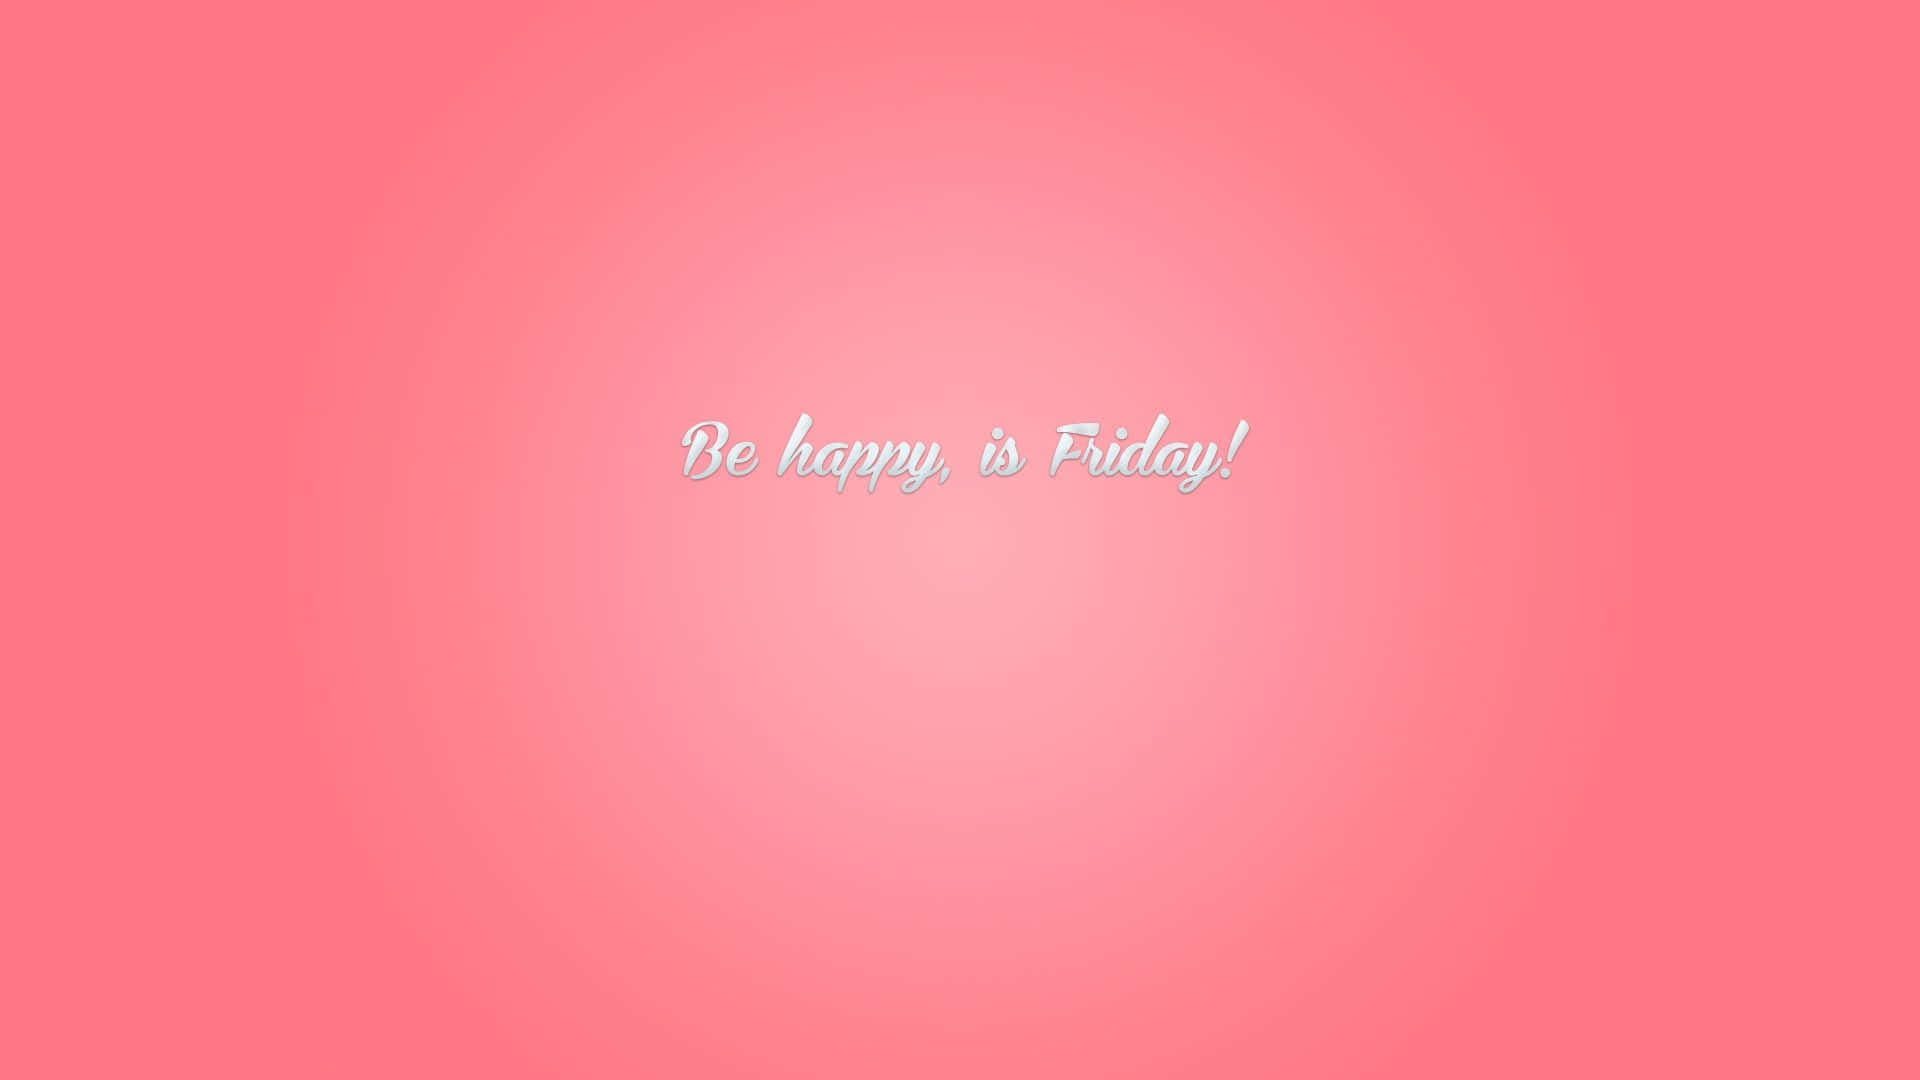 A Pink Background With The Words No Happy Is Friday